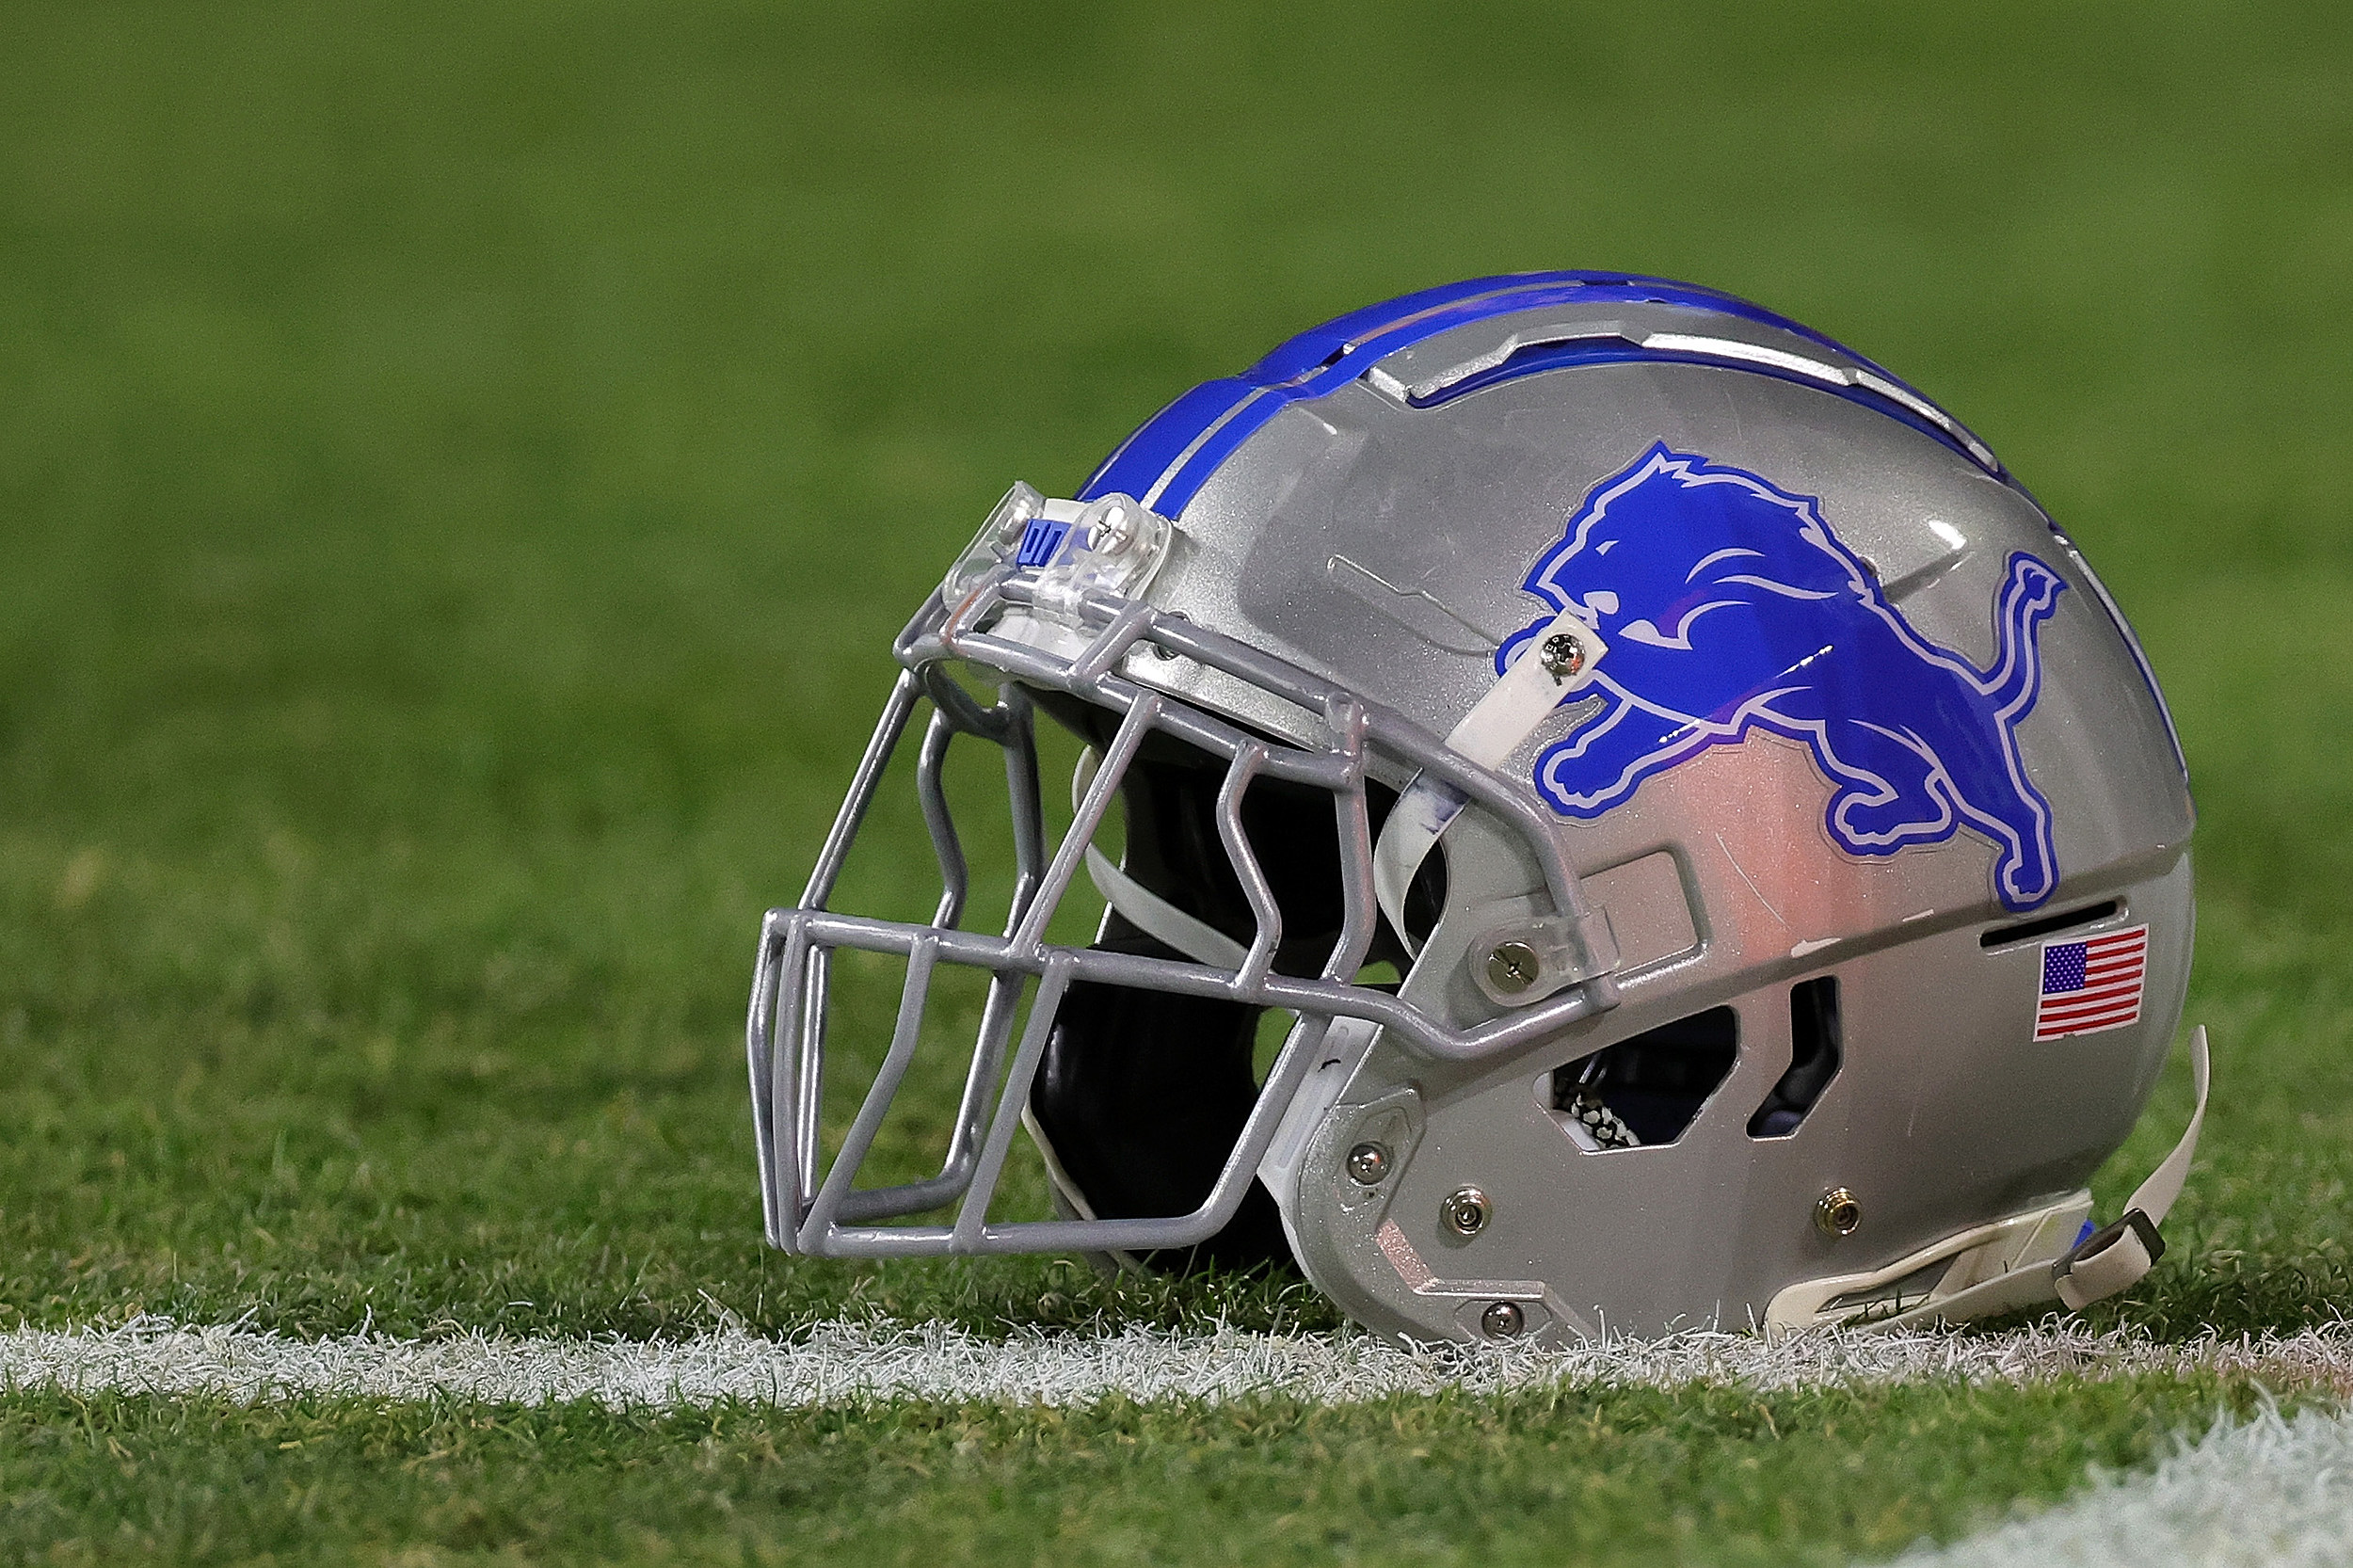 Detroit Lions nearly debuted all-black Color Rush uniforms in 2015